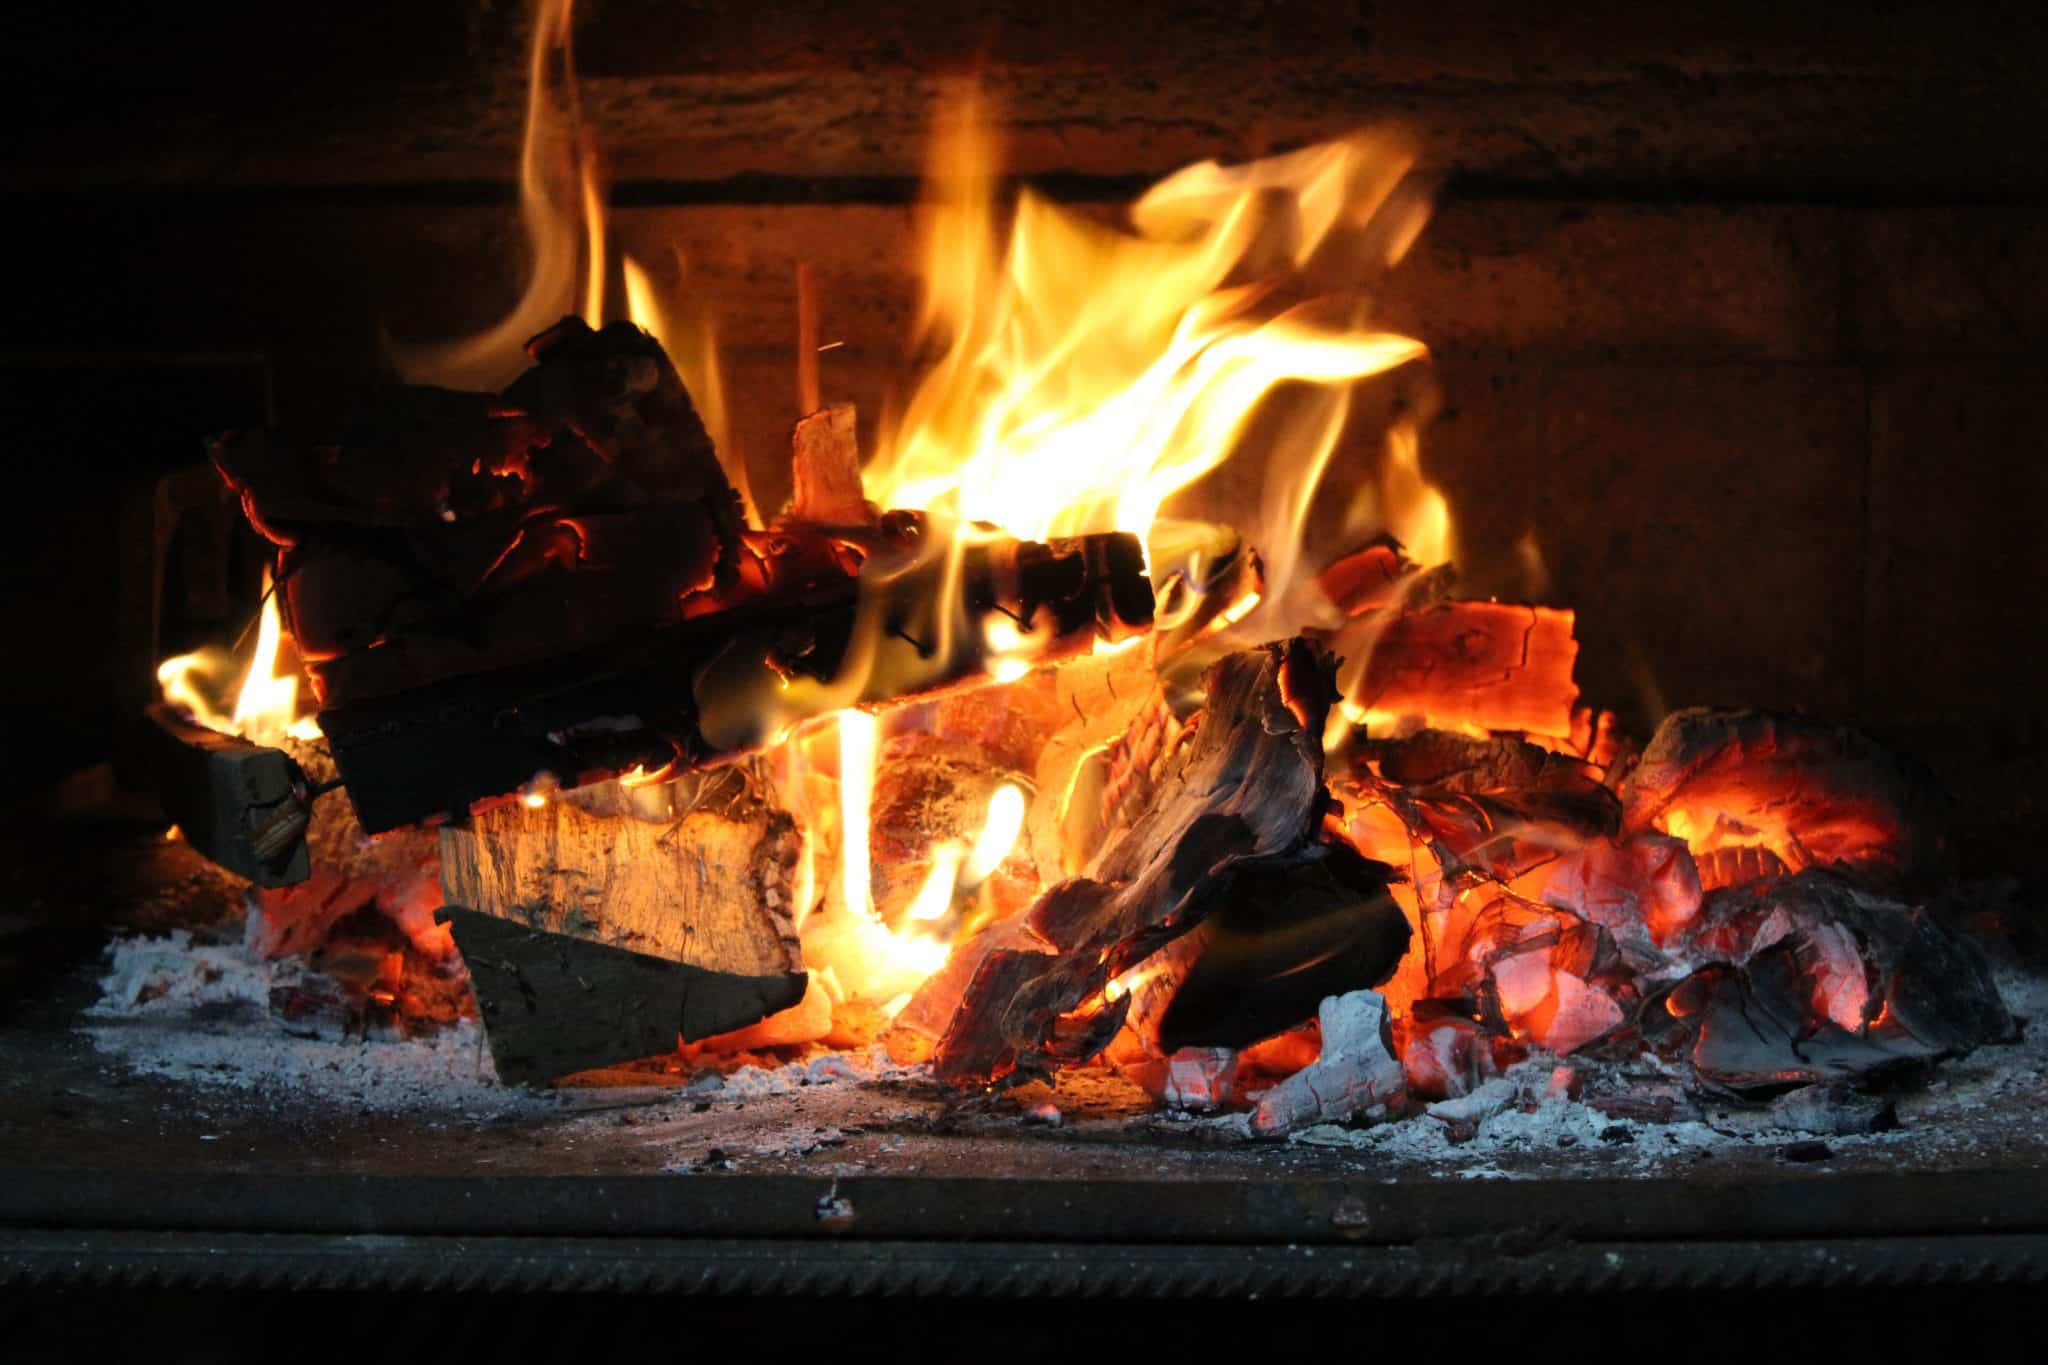 Photograph of a glowing log fire burning in a fire place